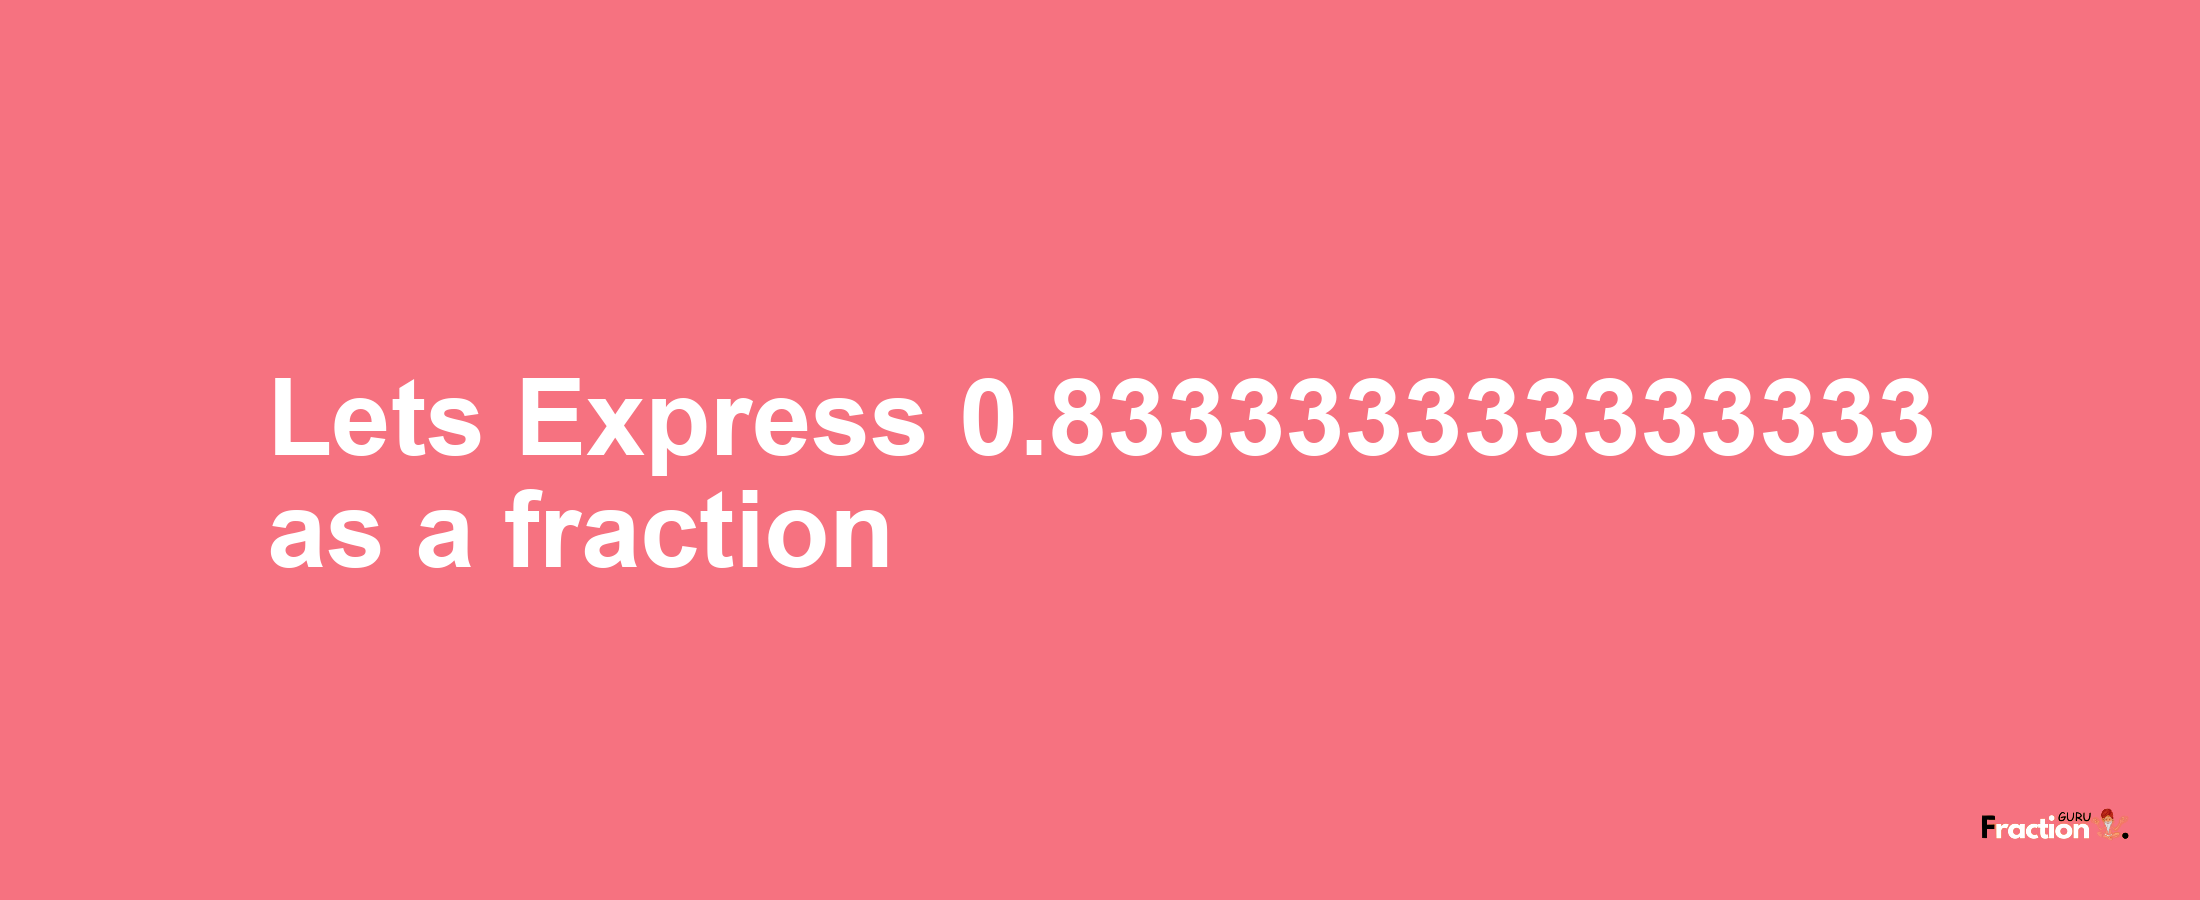 Lets Express 0.833333333333333 as afraction